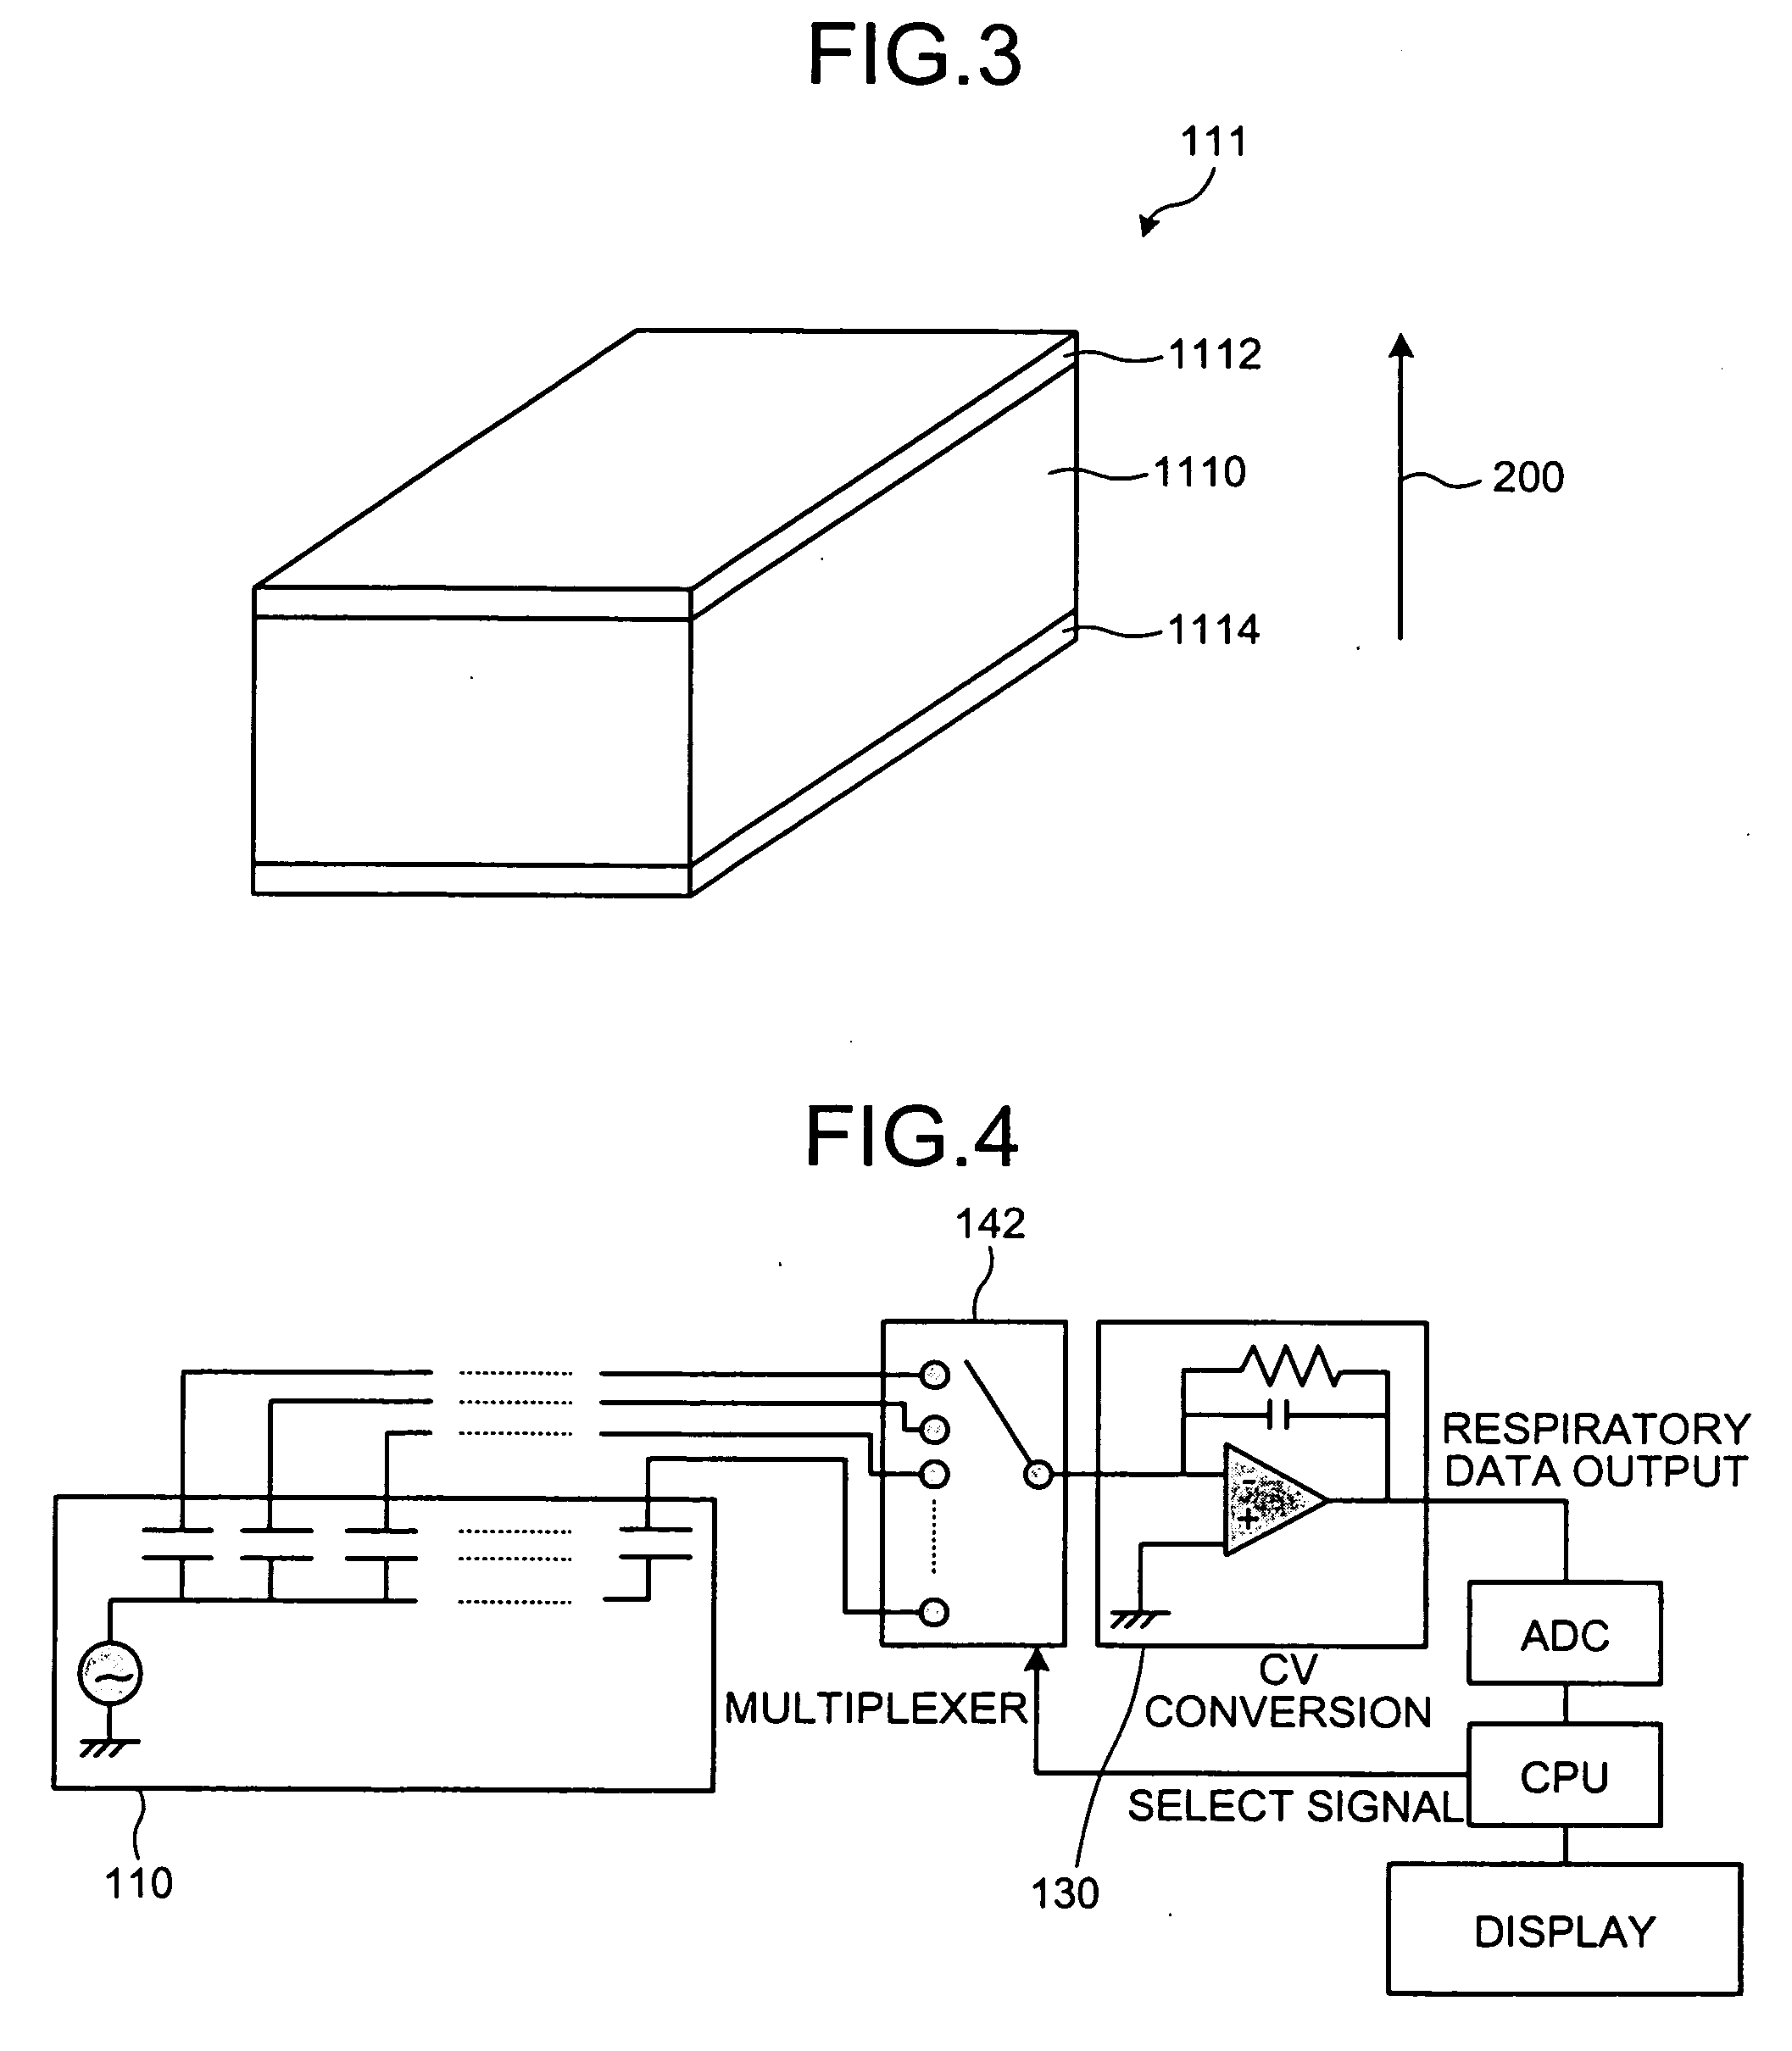 Apparatus, method and computer program product for determining respiratory condition